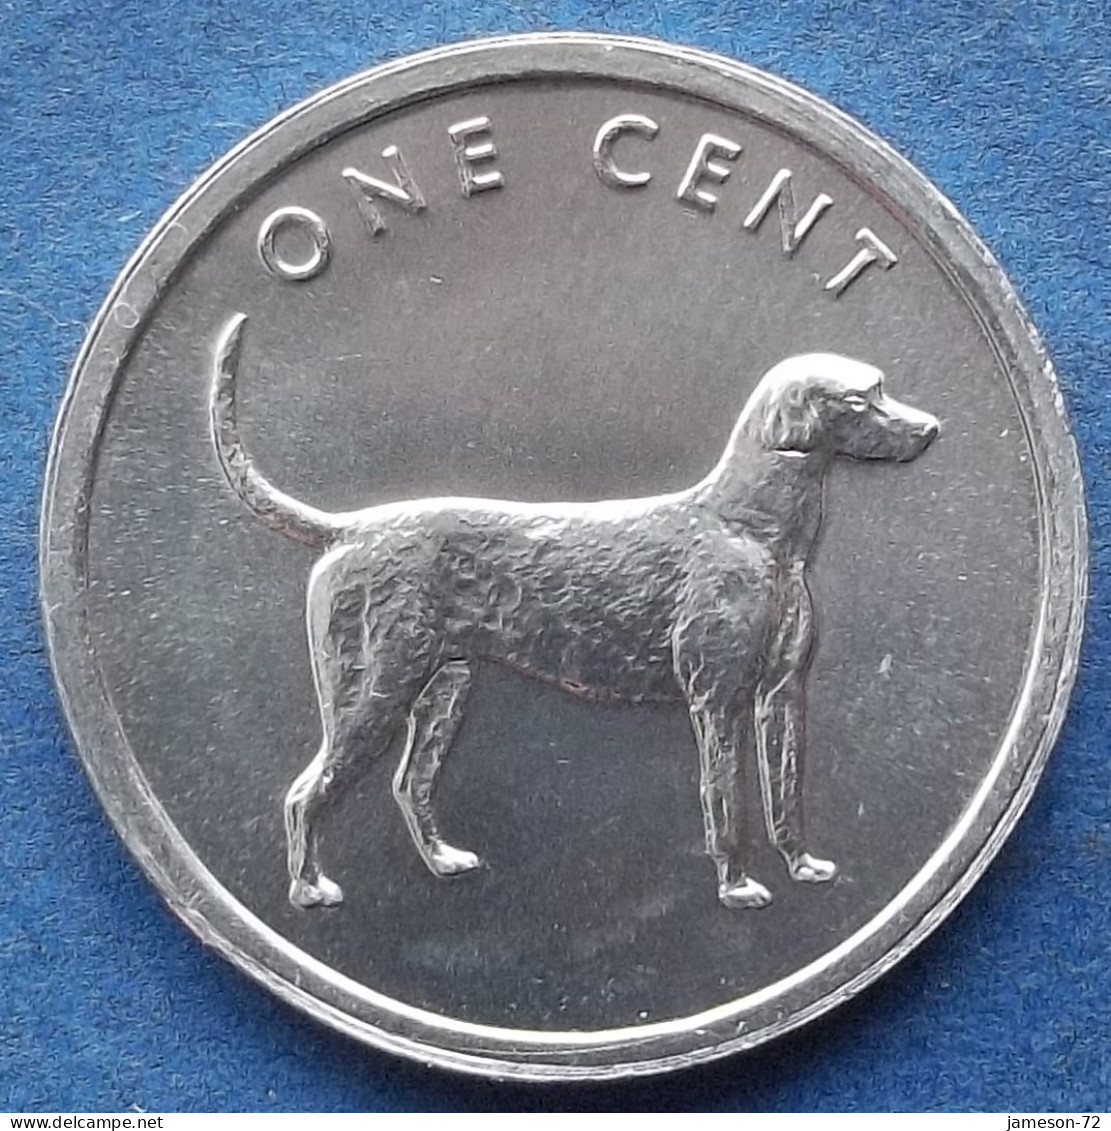 COOK ISLANDS - 1 Cent 2003 "Pointer Dog" KM# 421 Dependency Of New Zealand Elizabeth II - Edelweiss Coins - Cook